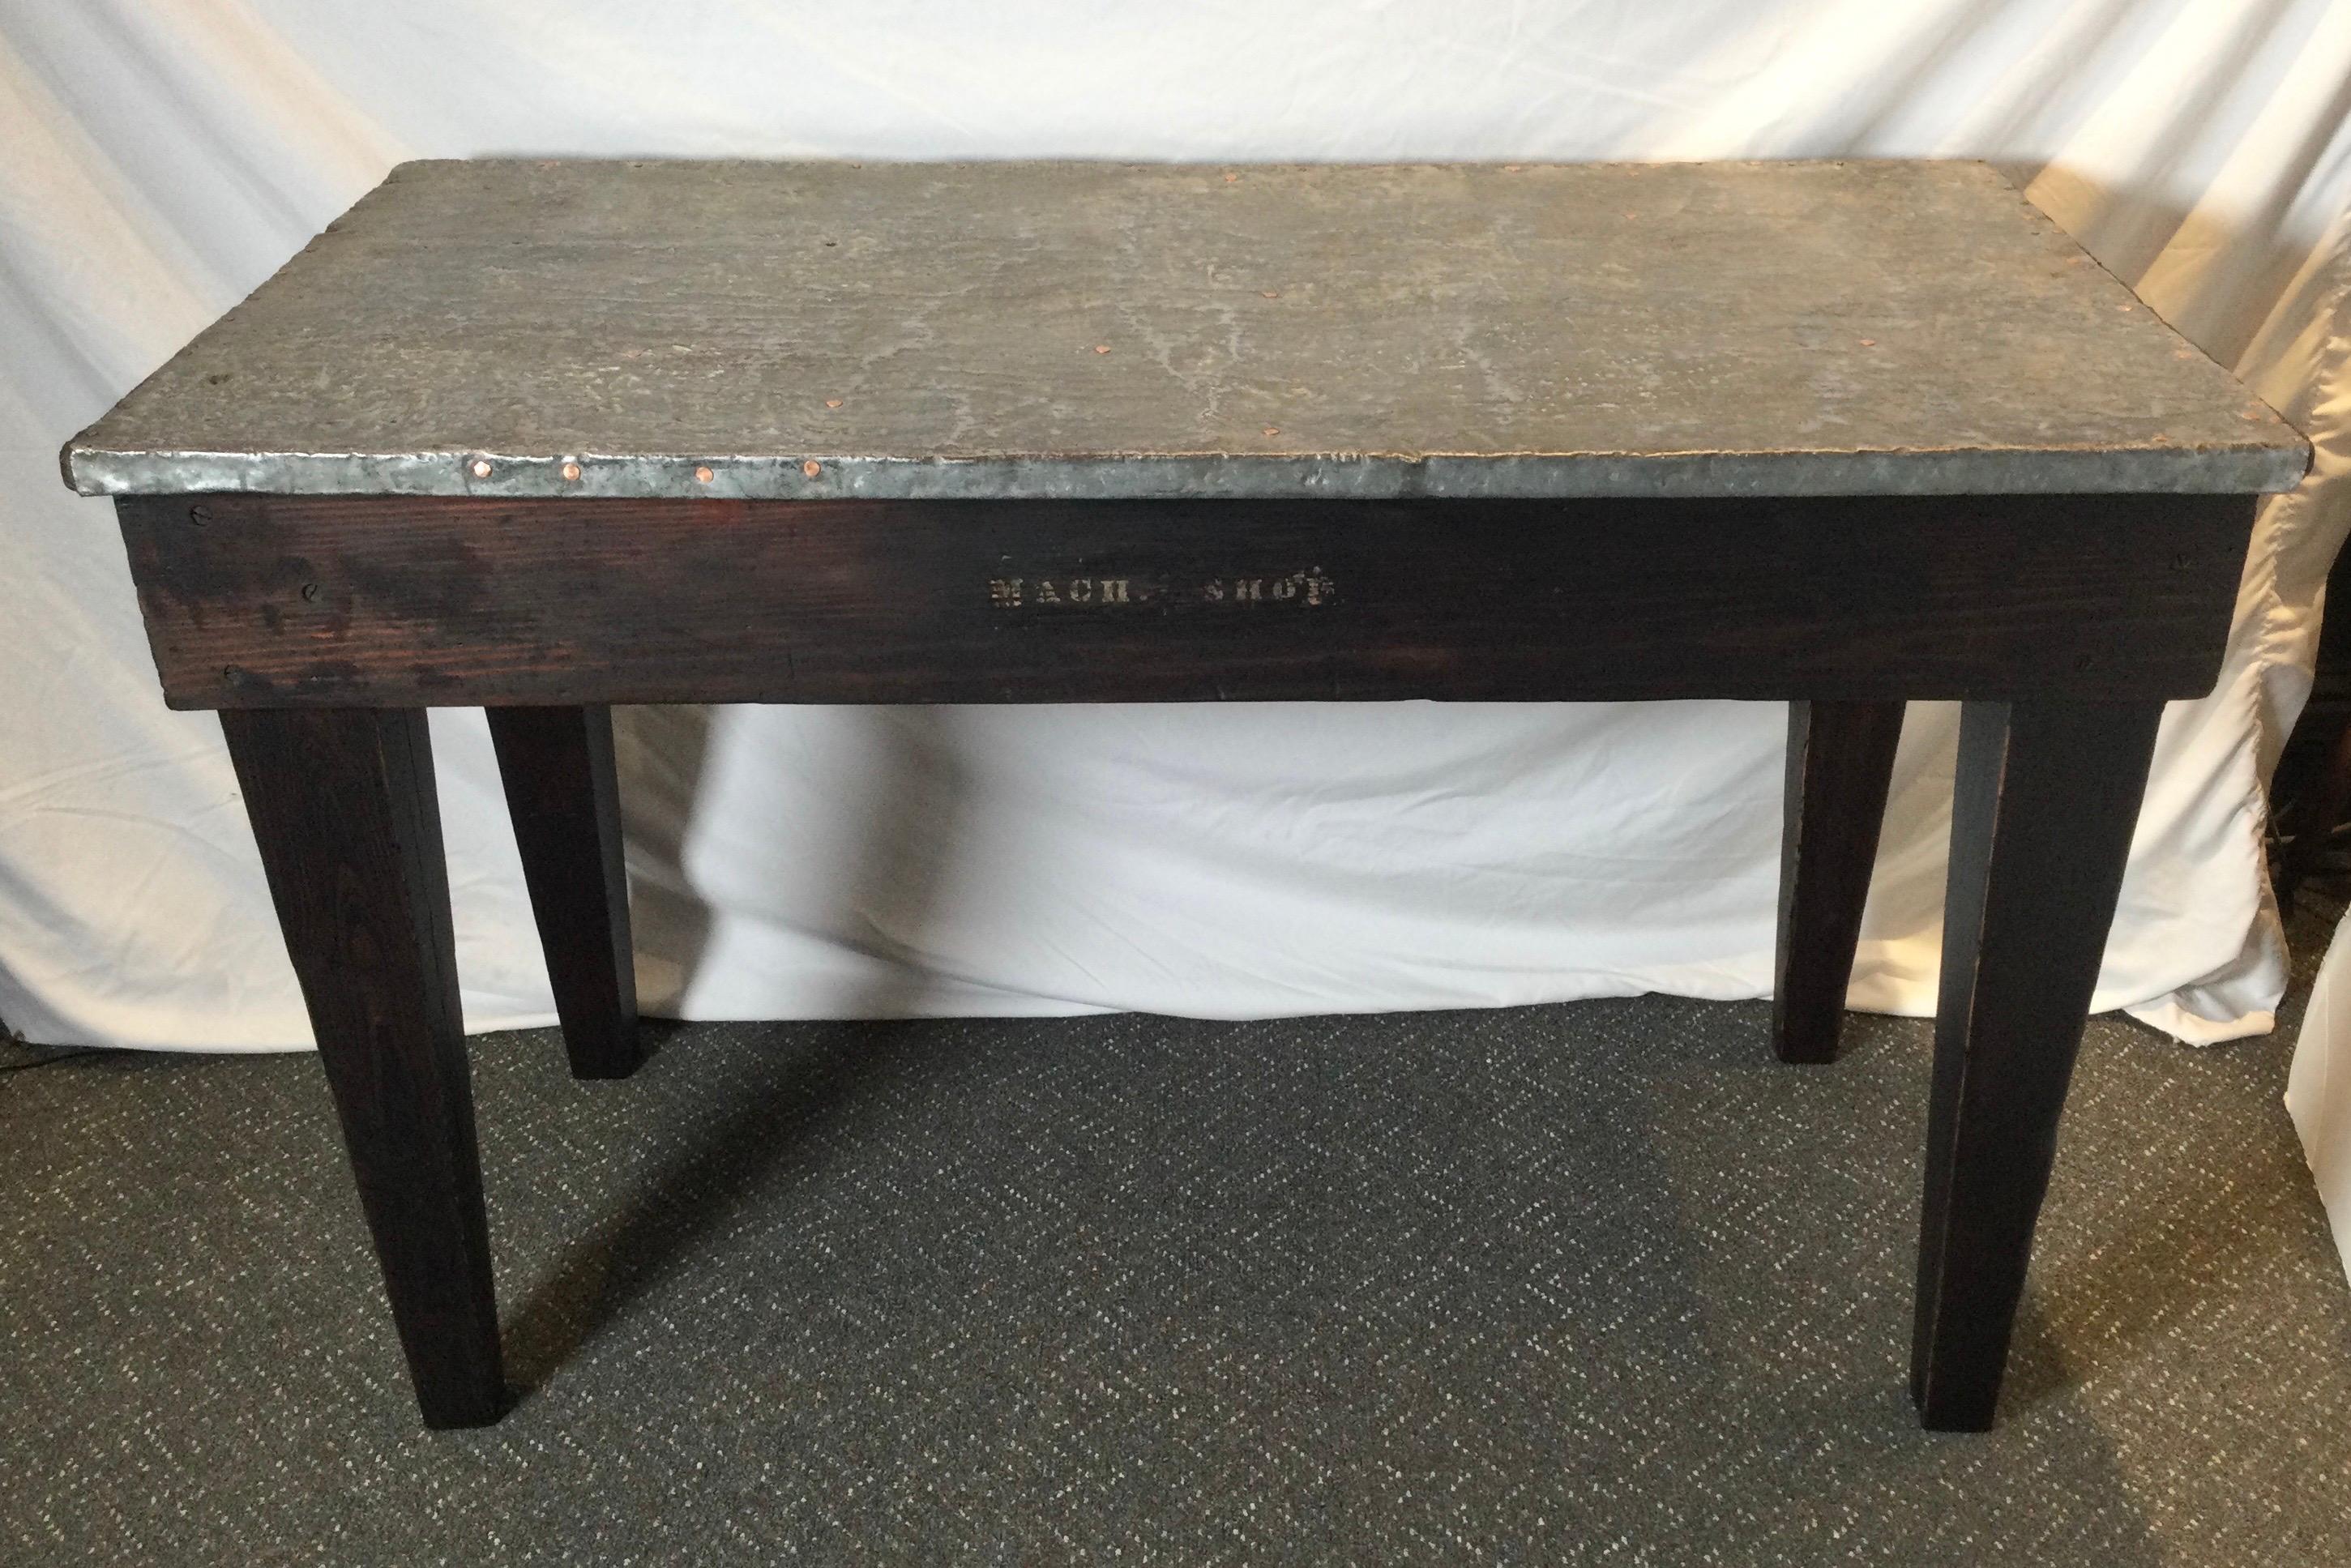 Wood and metal top desk work table marked 